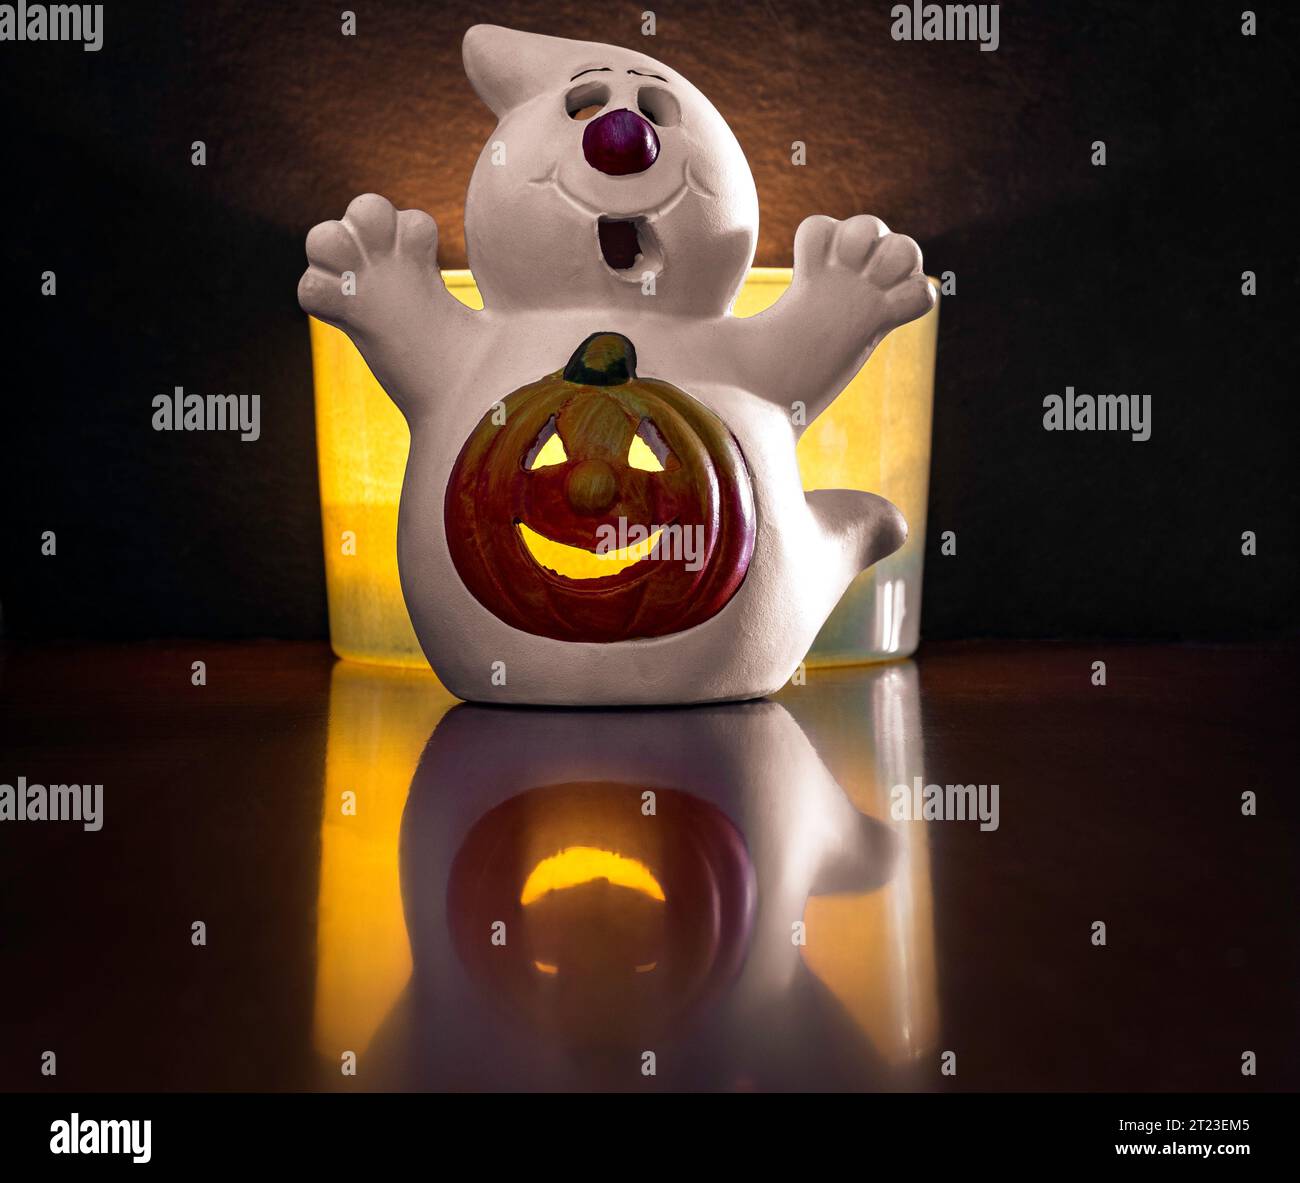 A plaster ghost with a funny Halloween pumpkins in the middle. Decoration placed on a wooden surface with a black background and light reflections. Stock Photo